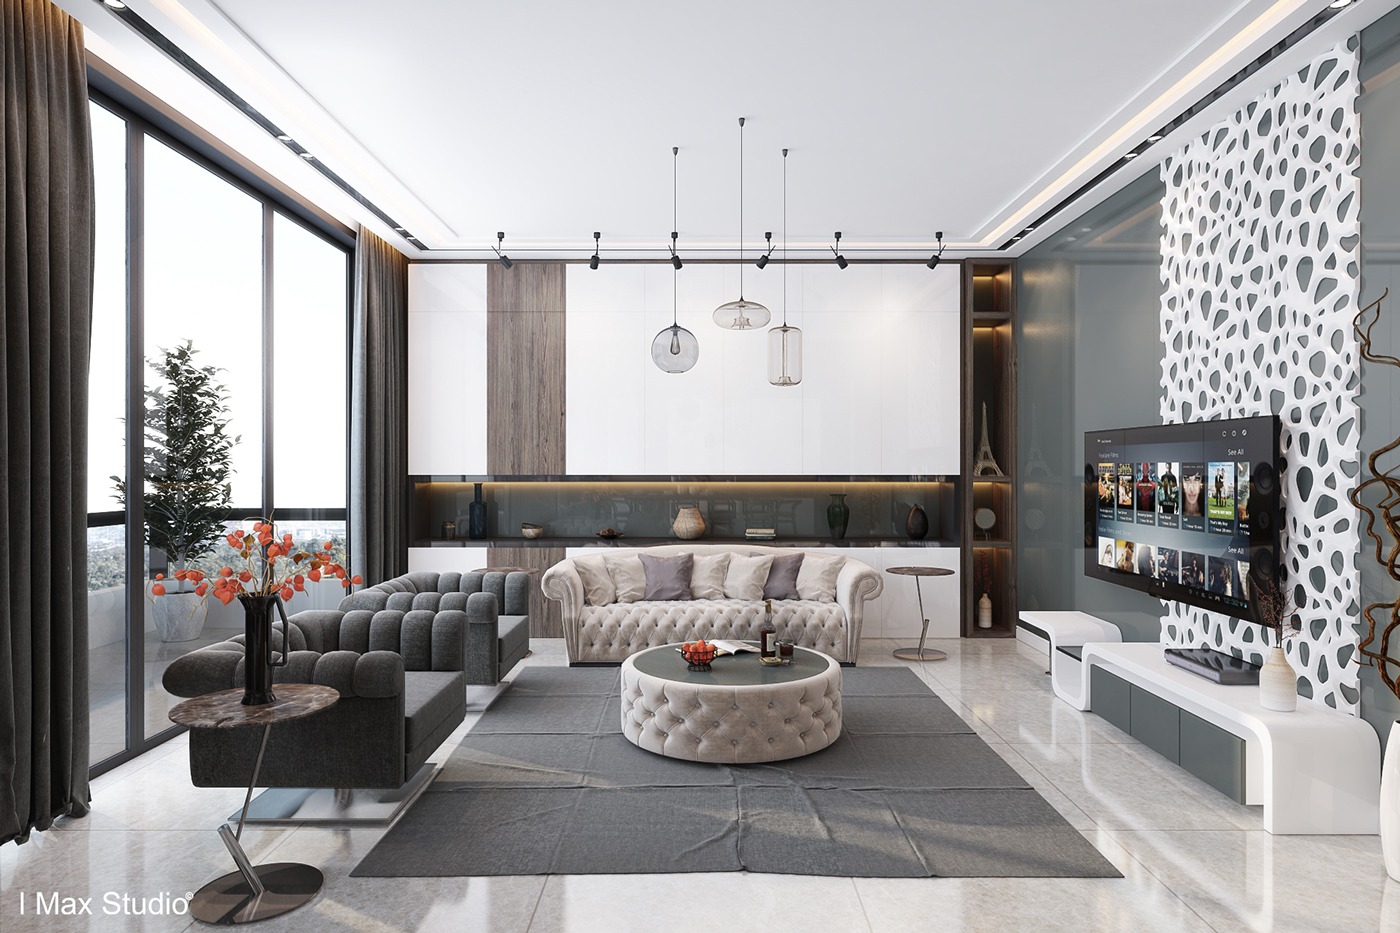 gray and white luxury living room "width =" 1400 "height =" 933 "srcset =" https://mileray.com/wp-content/uploads/2020/05/1588515574_935_Gorgeous-Living-Room-Designs-With-a-Luxury-and-Modern-Interior.jpg 1400w, https: // myfashionos .com / wp-content / uploads / 2016/11 / Max-Studio-300x200.jpg 300w, https://mileray.com/wp-content/uploads/2016/11/Max-Studio-768x512.jpg 768w, https: / /mileray.com/wp-content/uploads/2016/11/Max-Studio-1024x682.jpg 1024w, https://mileray.com/wp-content/uploads/2016/11/Max-Studio-696x464. jpg 696w, https://mileray.com/wp-content/uploads/2016/11/Max-Studio-1068x712.jpg 1068w, https://mileray.com/wp-content/uploads/2016/11/Max- Studio-630x420.jpg 630w "Sizes =" (maximum width: 1400px) 100vw, 1400px